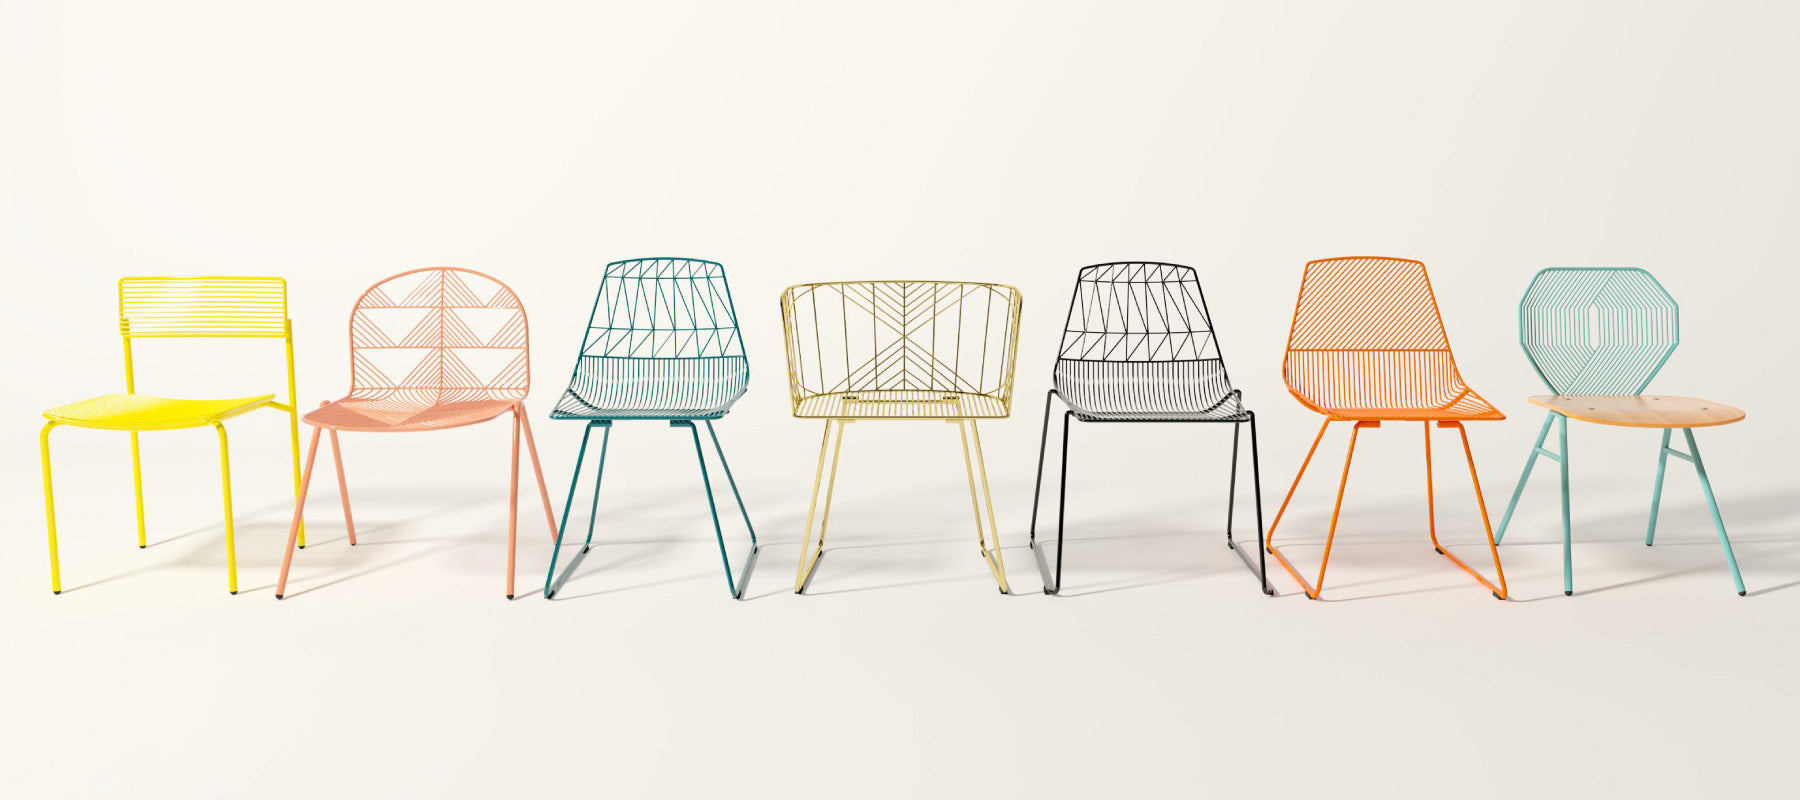 Contemporary Dining chair Designs by Bend Goods Furniture store